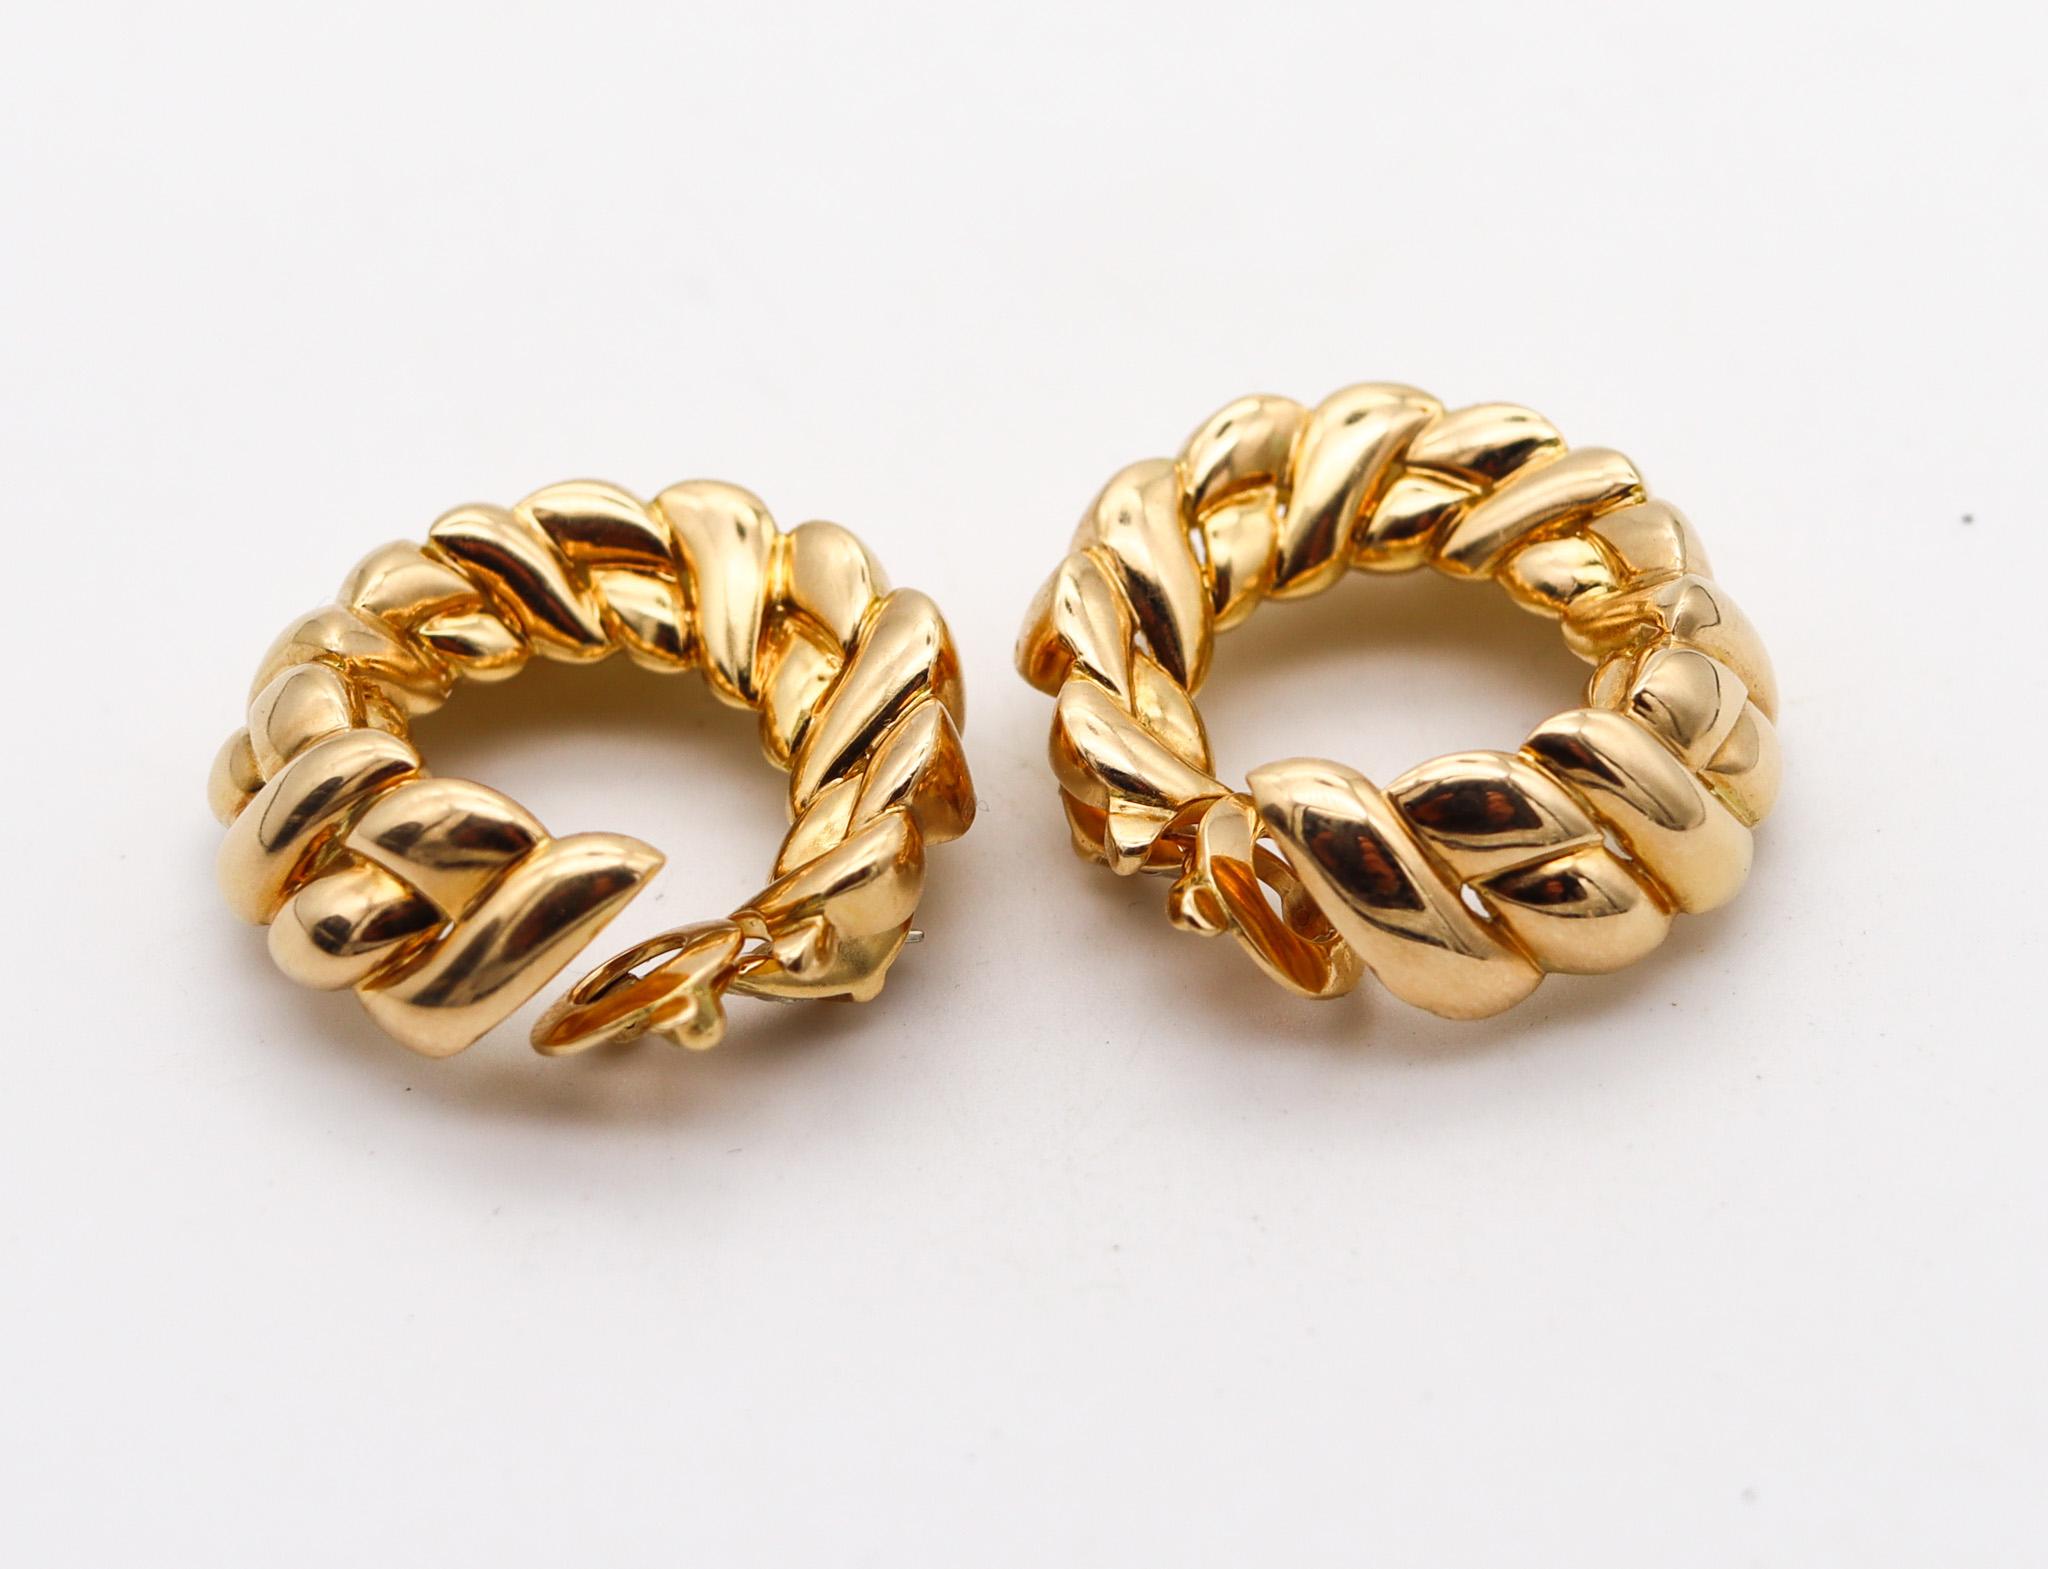 Van Cleef & Arpels 1970 Paris Hoops Earrings In Solid 18Kt Yellow Gold In Excellent Condition For Sale In Miami, FL